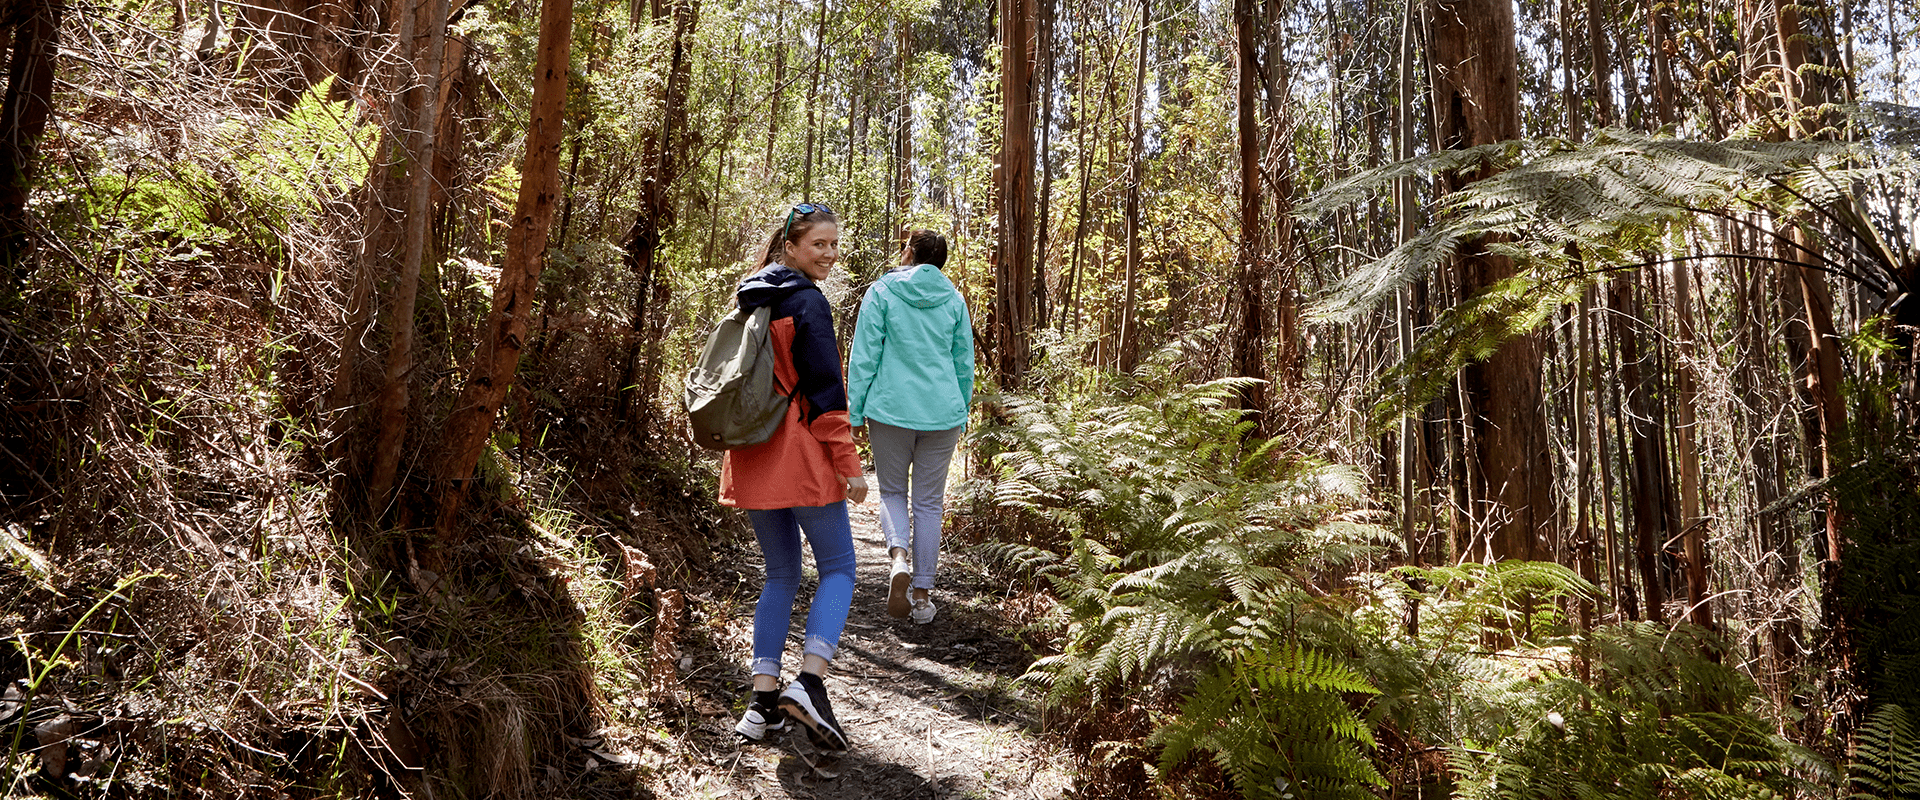 Two female hikers make there way up a path surrounded by lush dense native vegetation and tall trees.